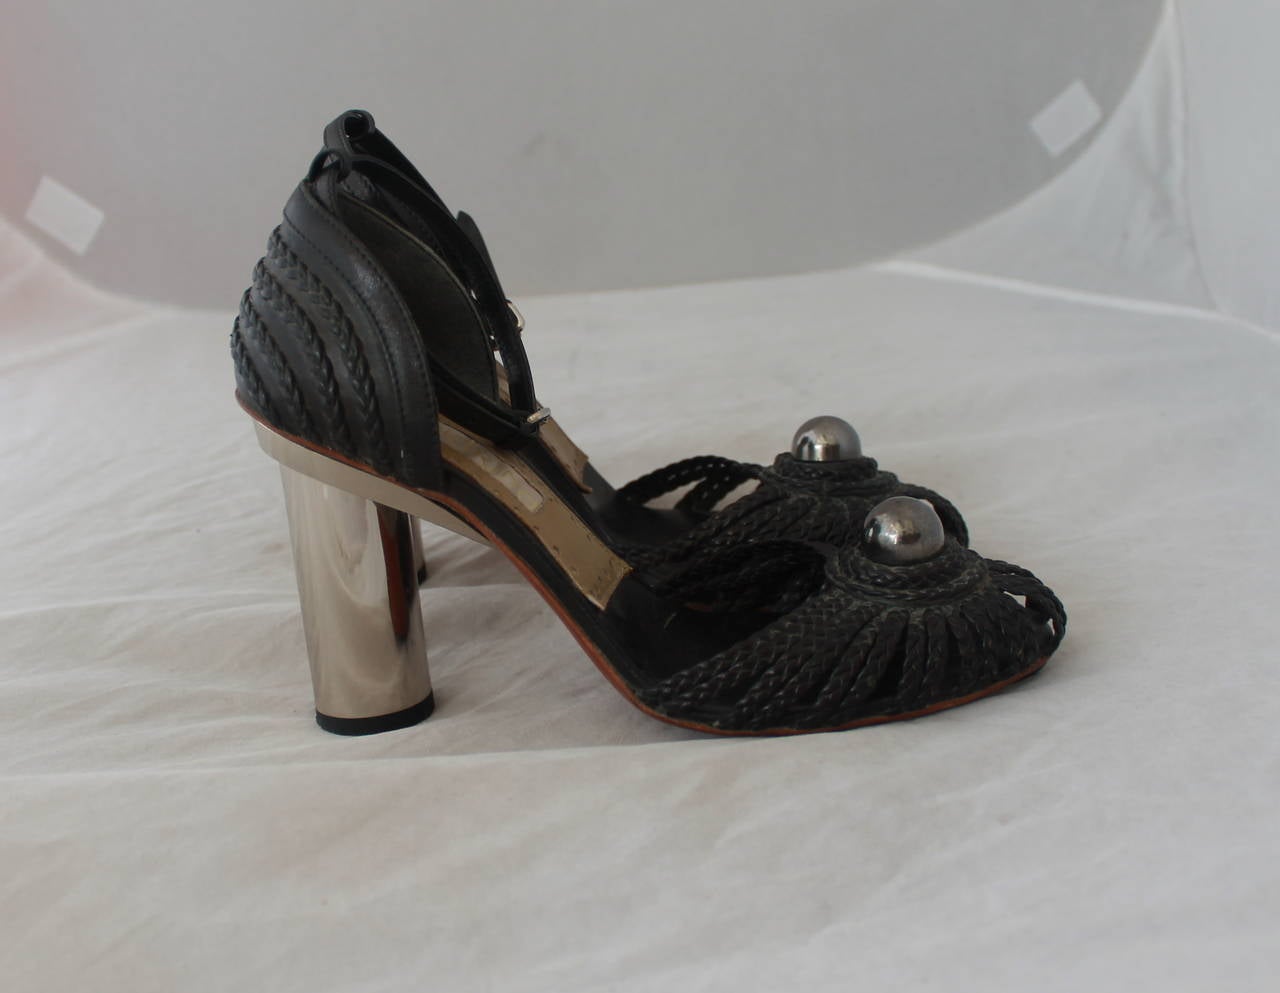 Women's Malandrino 1990's Vintage Black Braided Leather Heels with Ankle Strap -  36.5